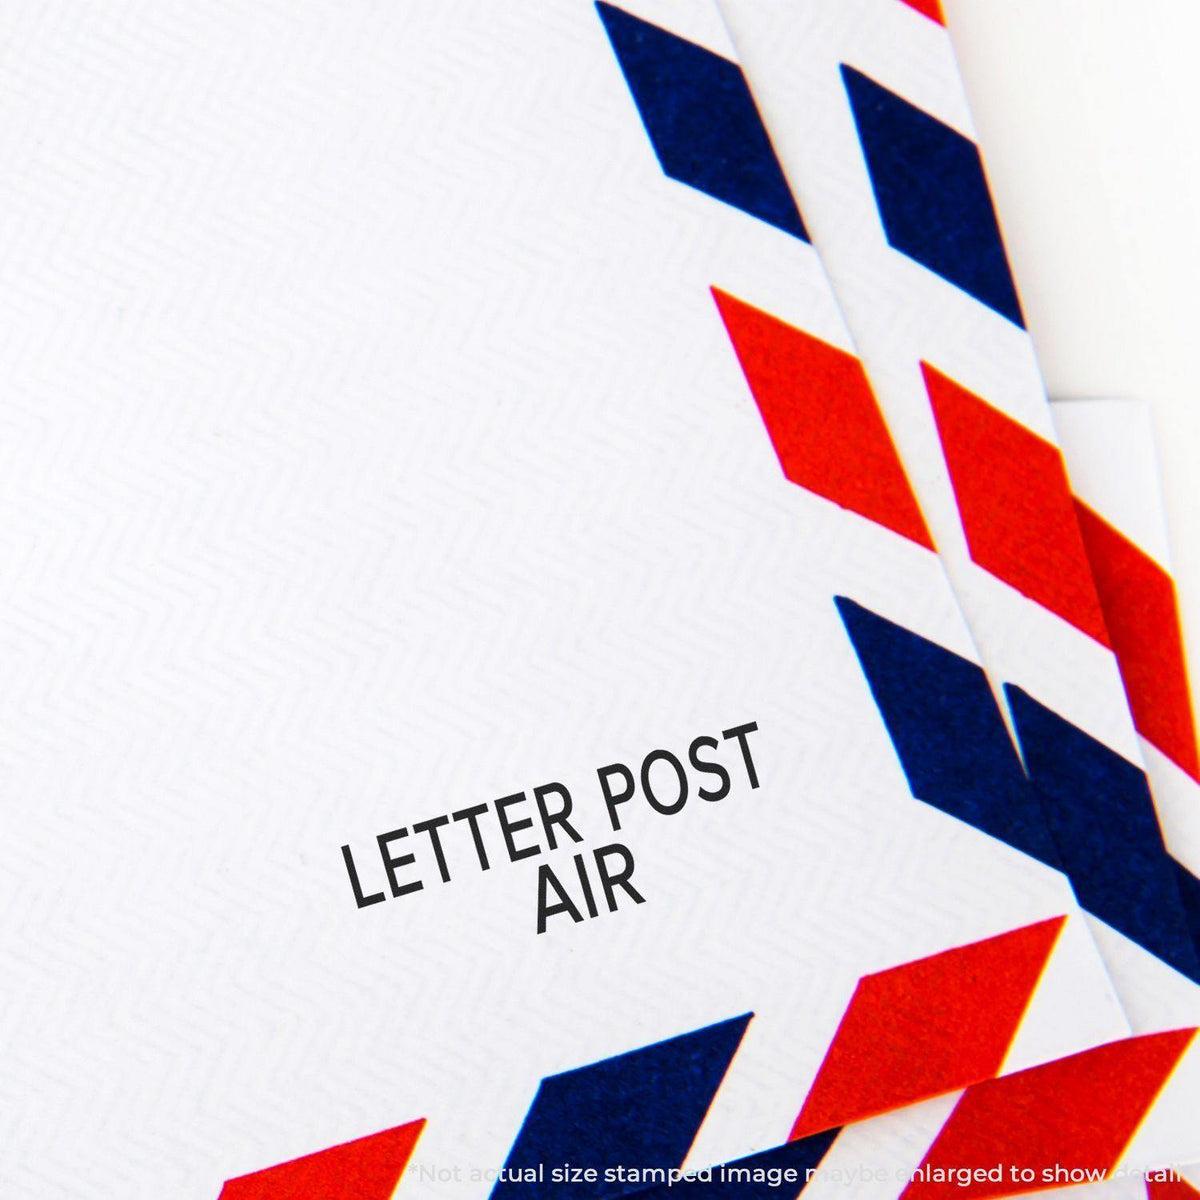 In Use Large Letter Post Air Rubber Stamp Image